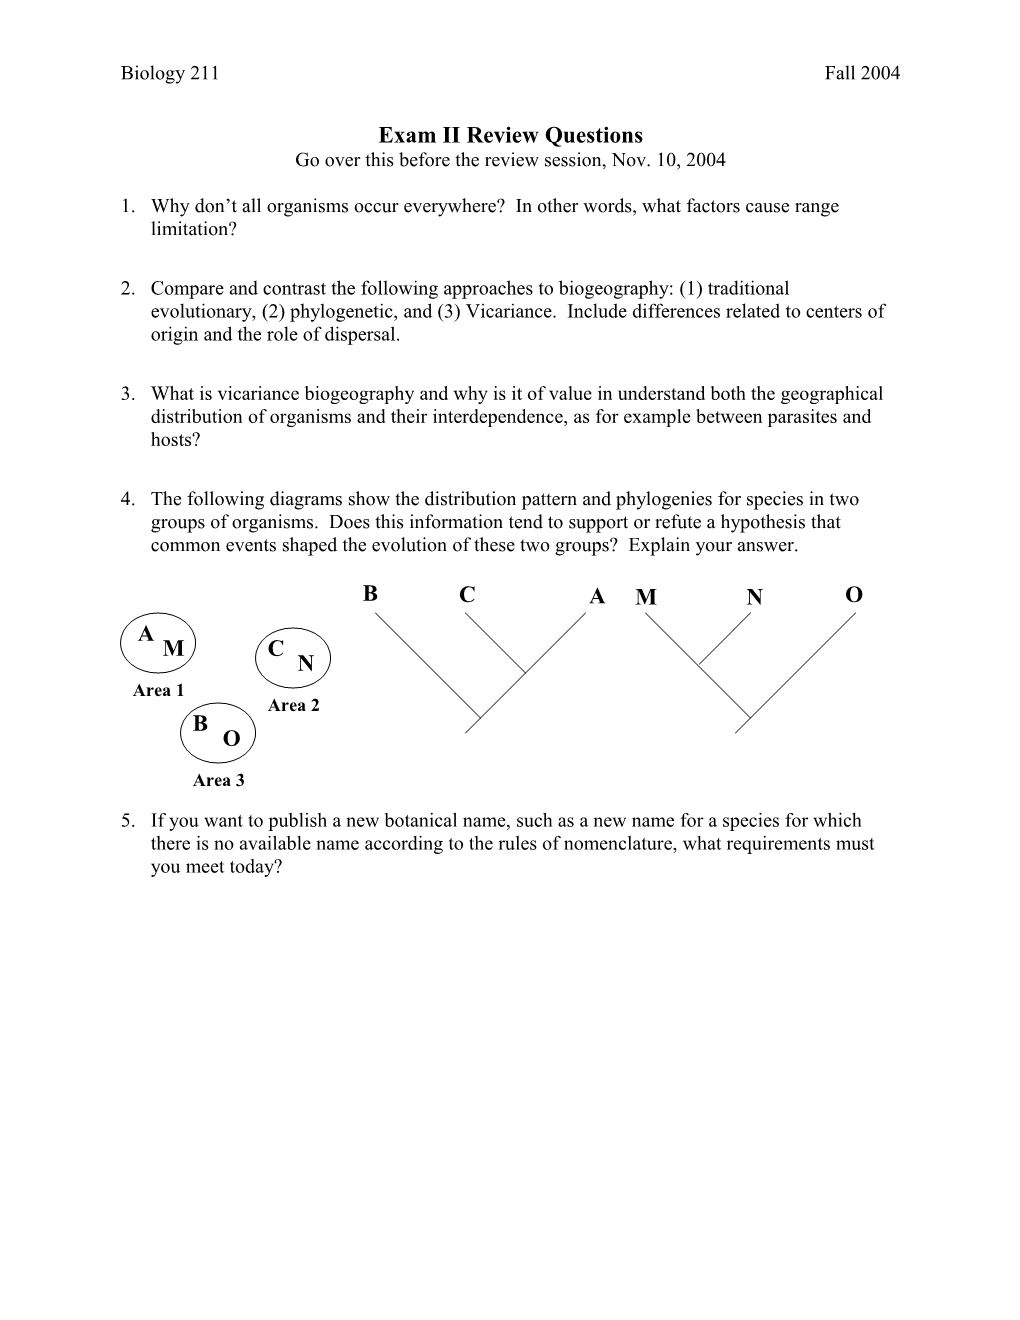 Exam II Review Questions